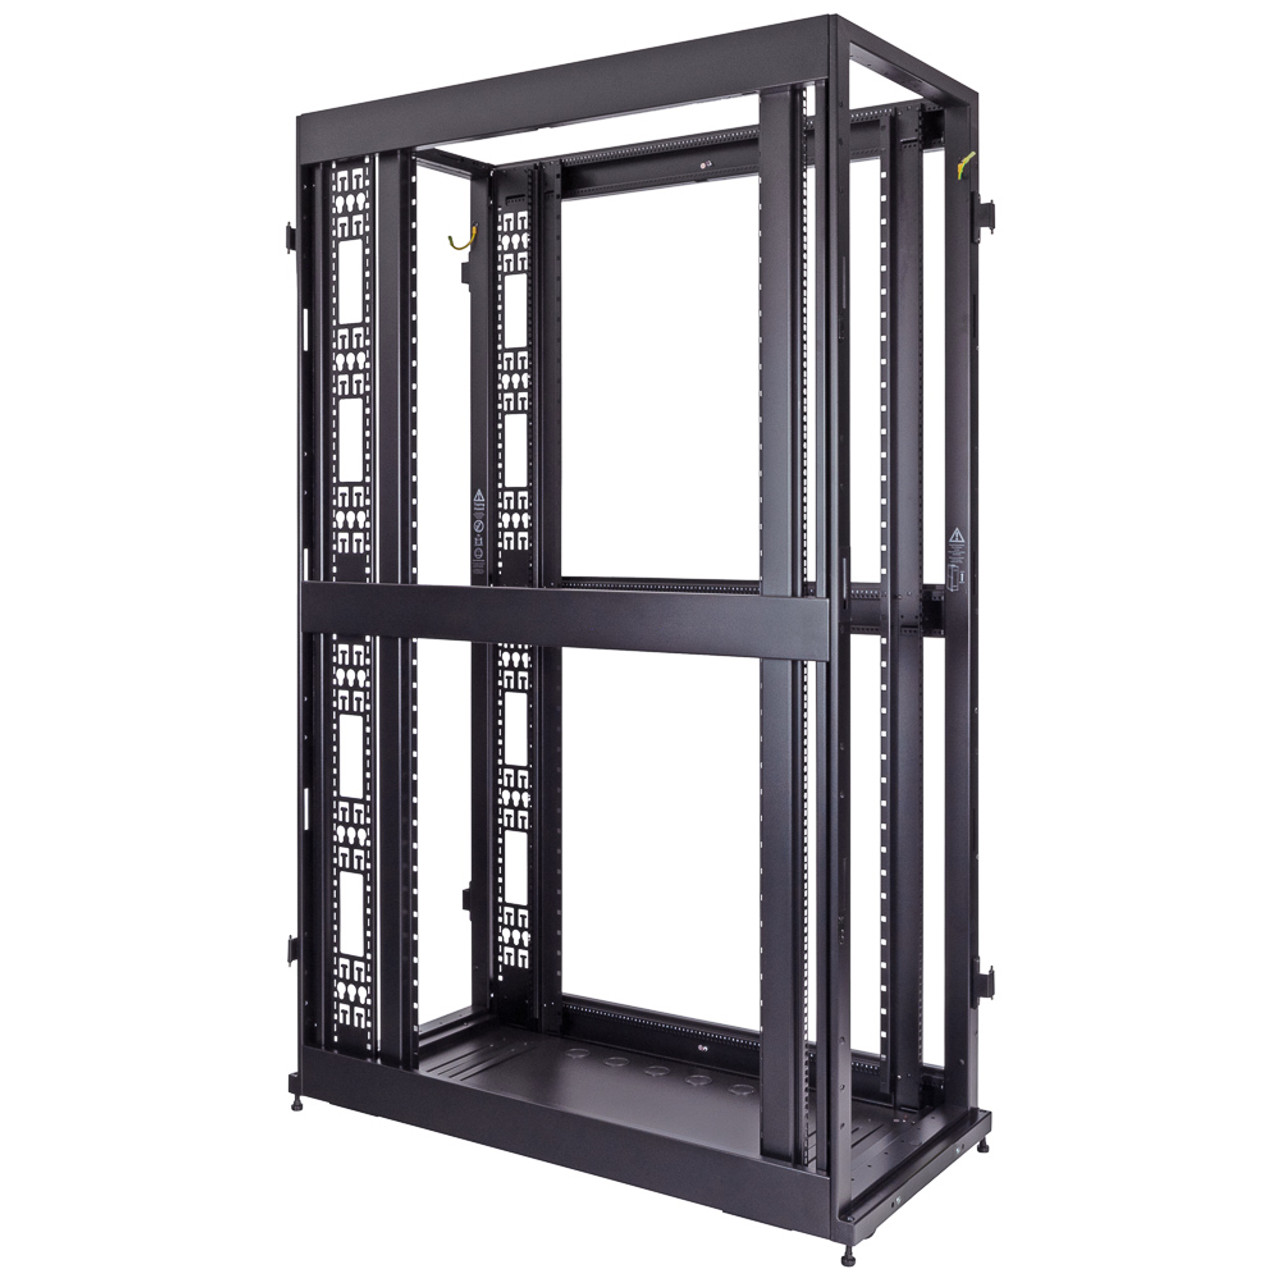 NavePoint 42U Server Rack Cabinet, 1200mm depth, Cable Management Top, Perforated Door (Commercial Series)